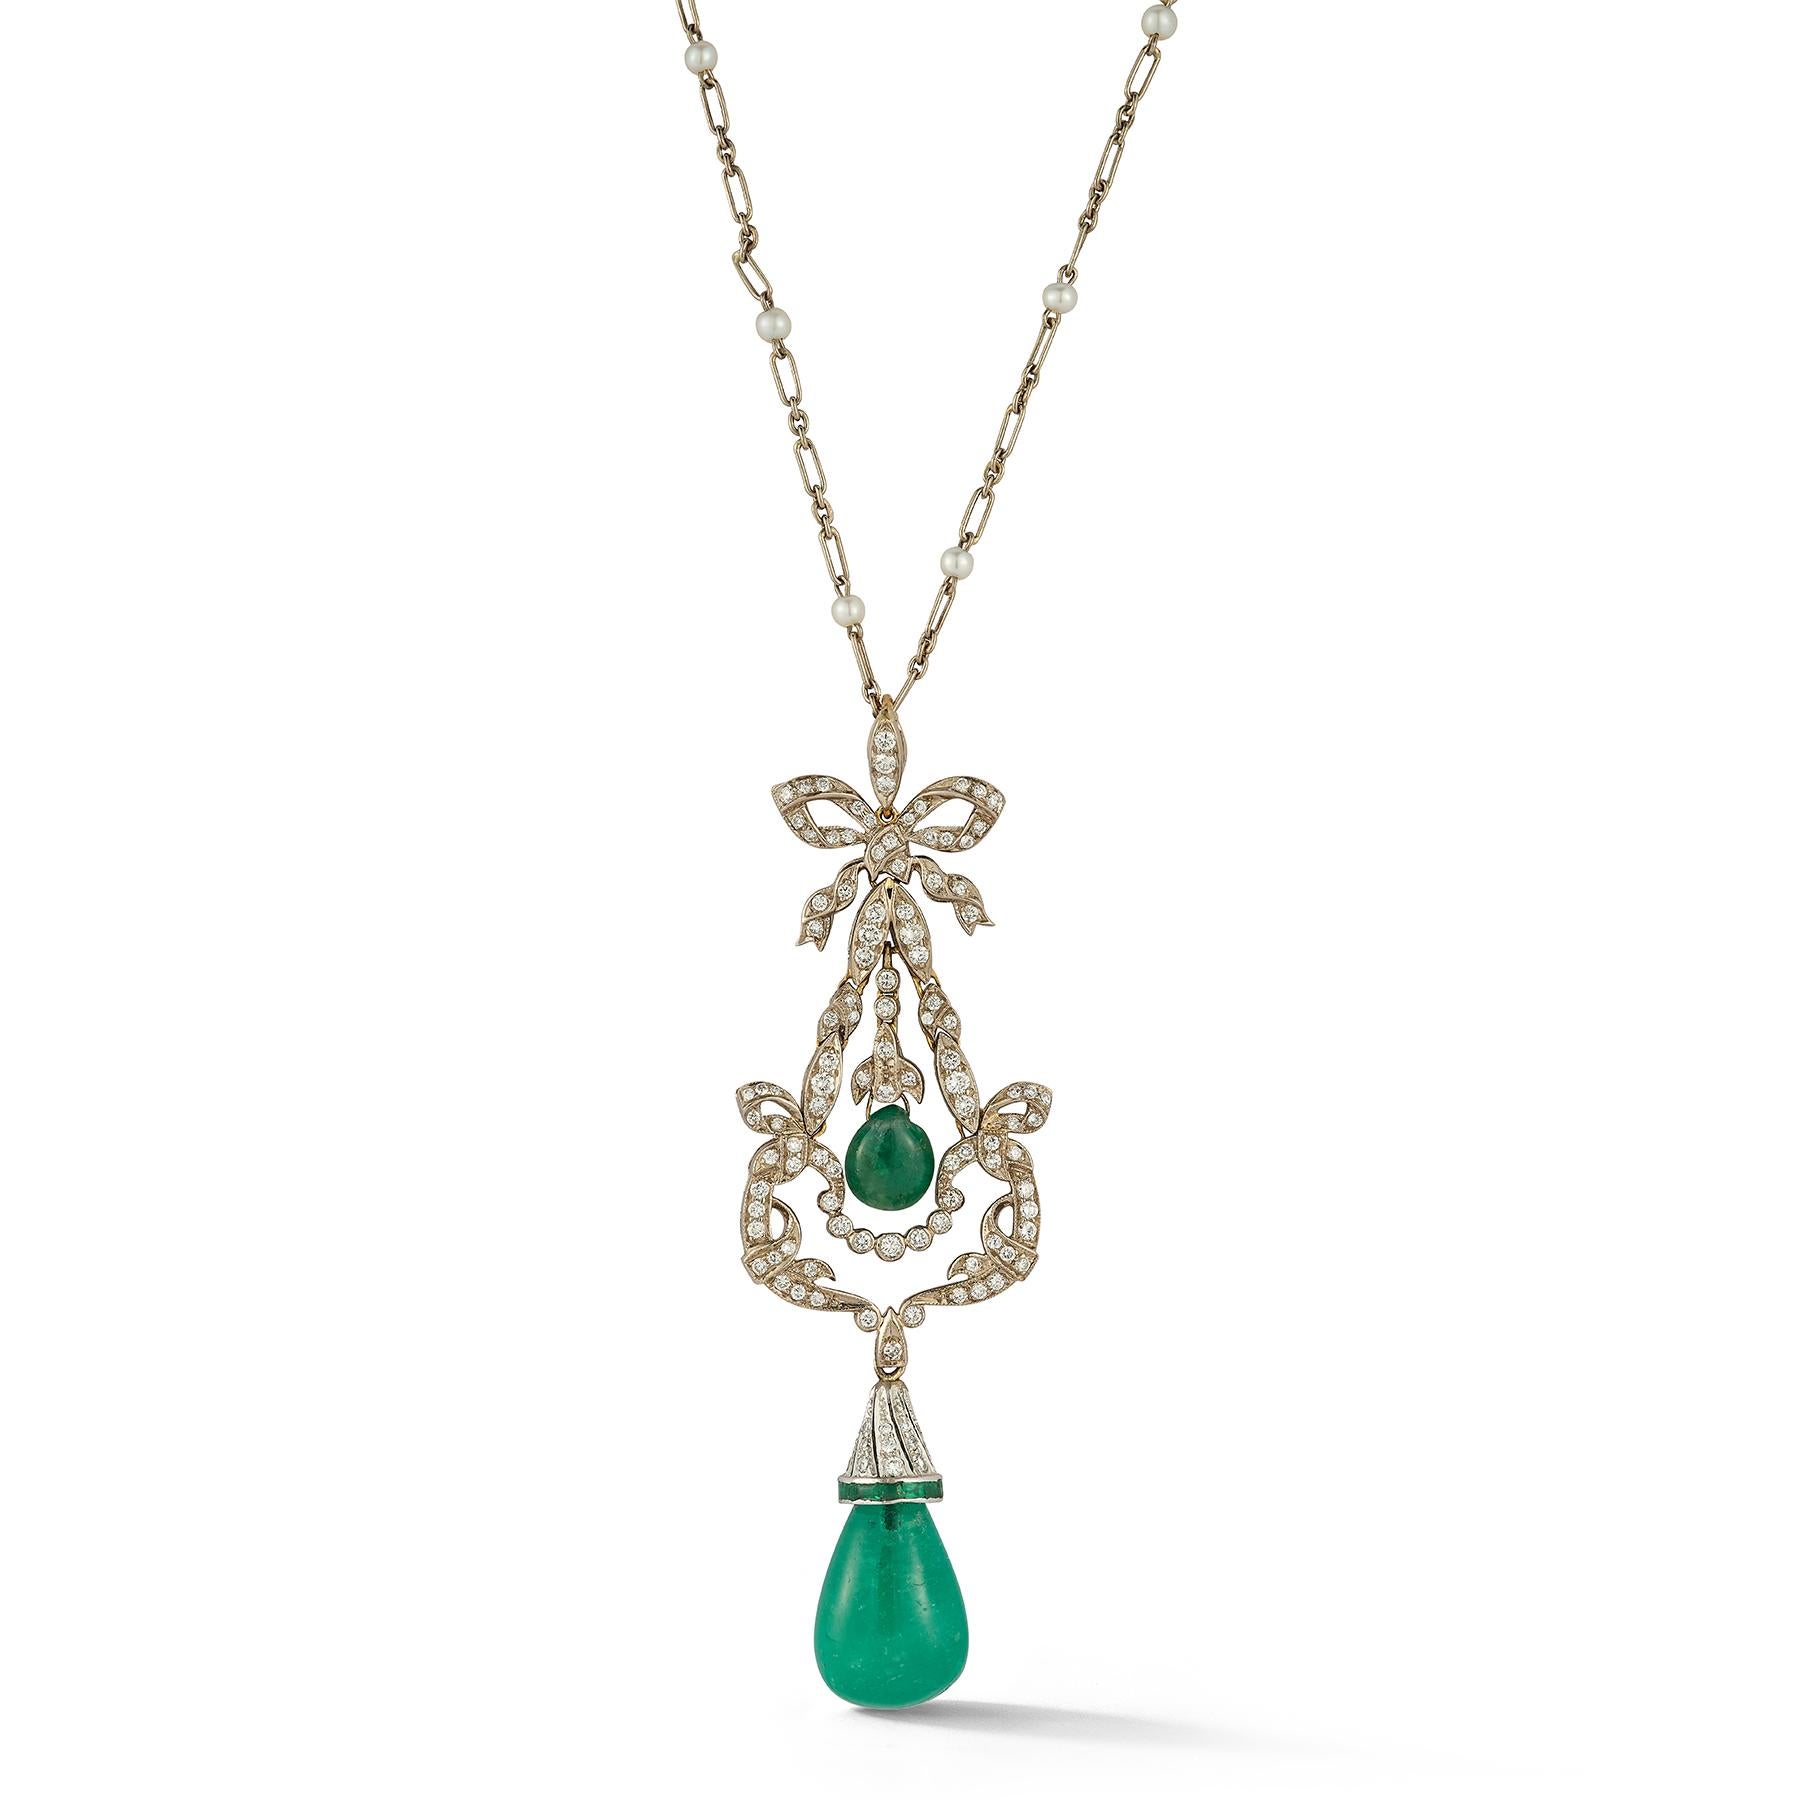 Emerald Drop Pendant Necklace

An 18 karat white gold pendant set with round cut diamonds and 2 cabochon emerald drops on an 18 karat white gold chain with 20 pearls evenly spaced throughout

Approximate Total Emerald Weight: 18.85 carats

Chain